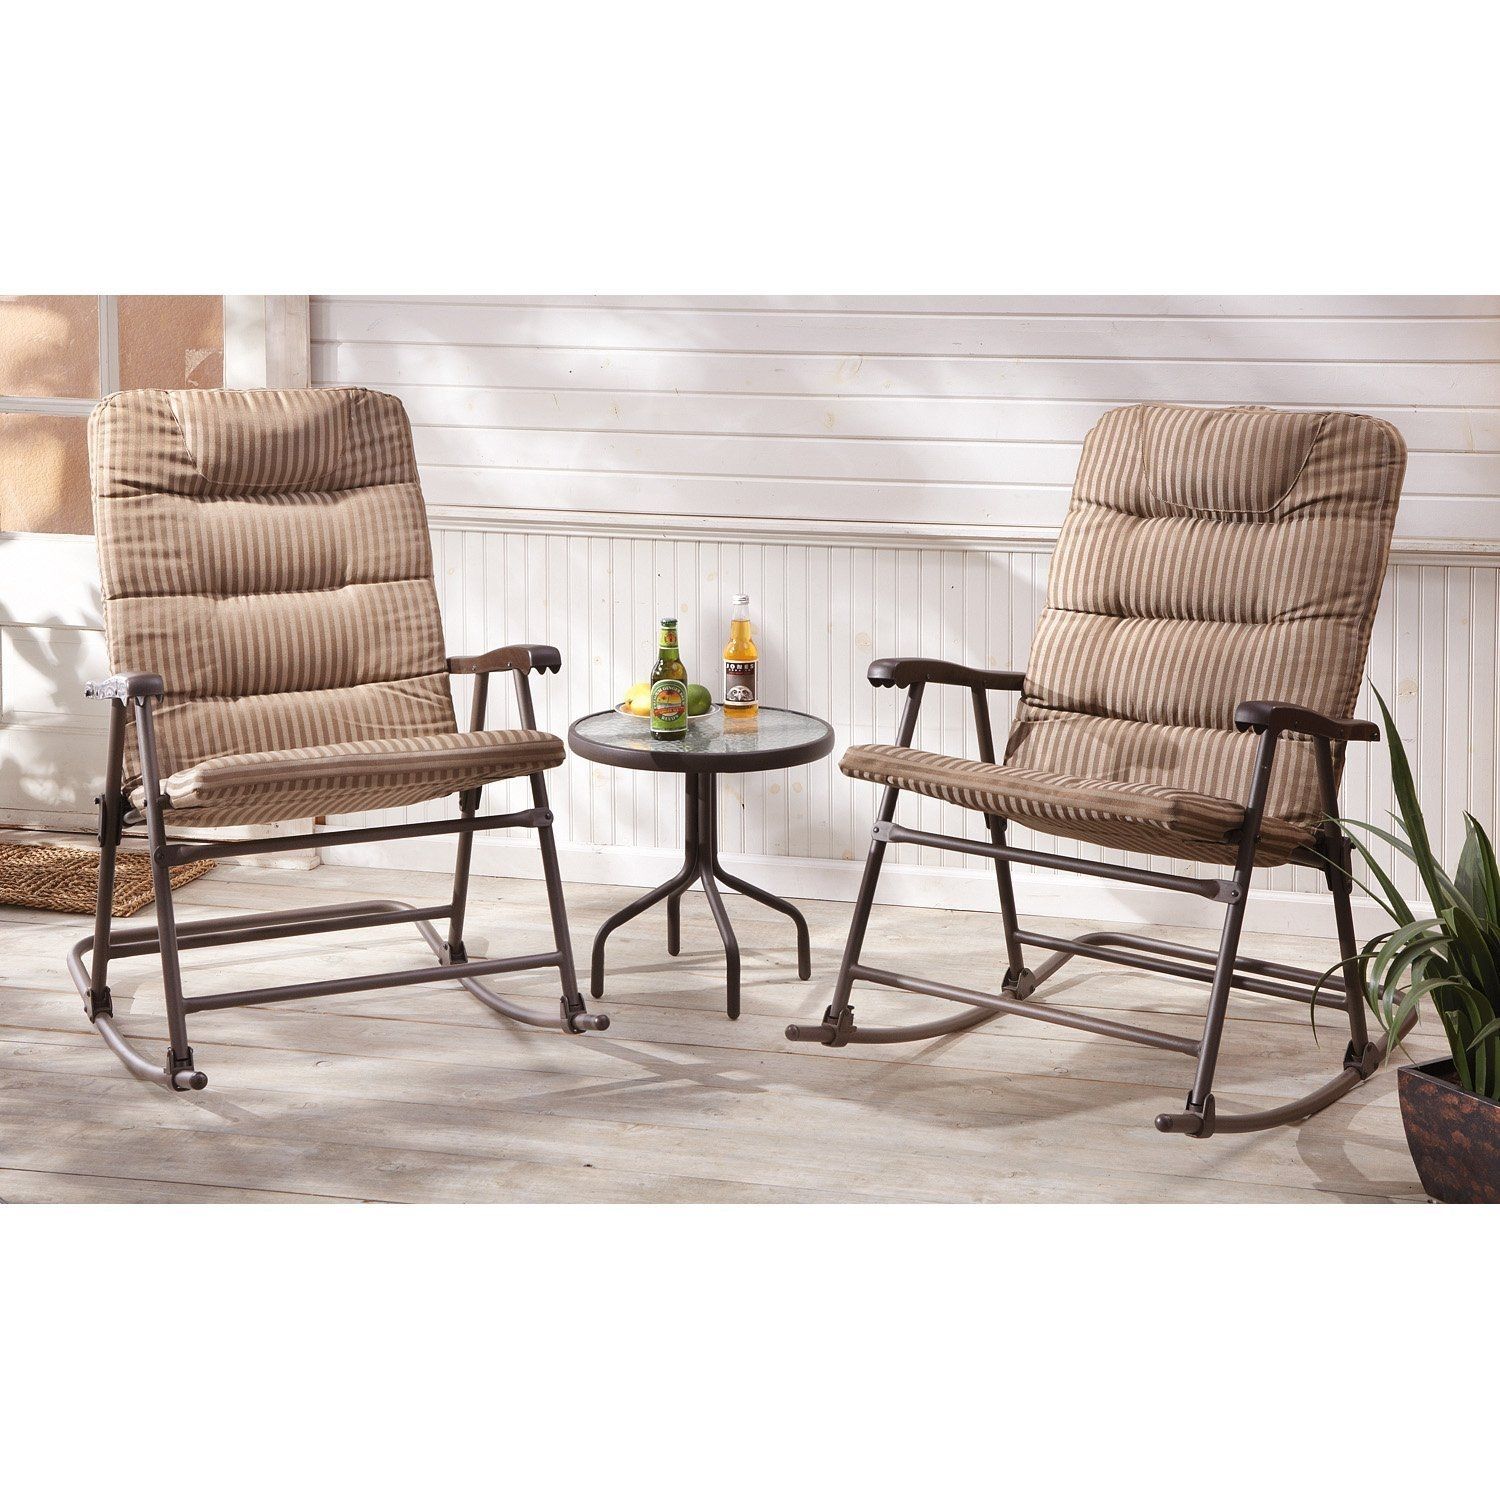 3 Pc. Castlecreek Padded Rocker Set | For The Home | Pinterest Intended For Padded Patio Rocking Chairs (Photo 1 of 15)